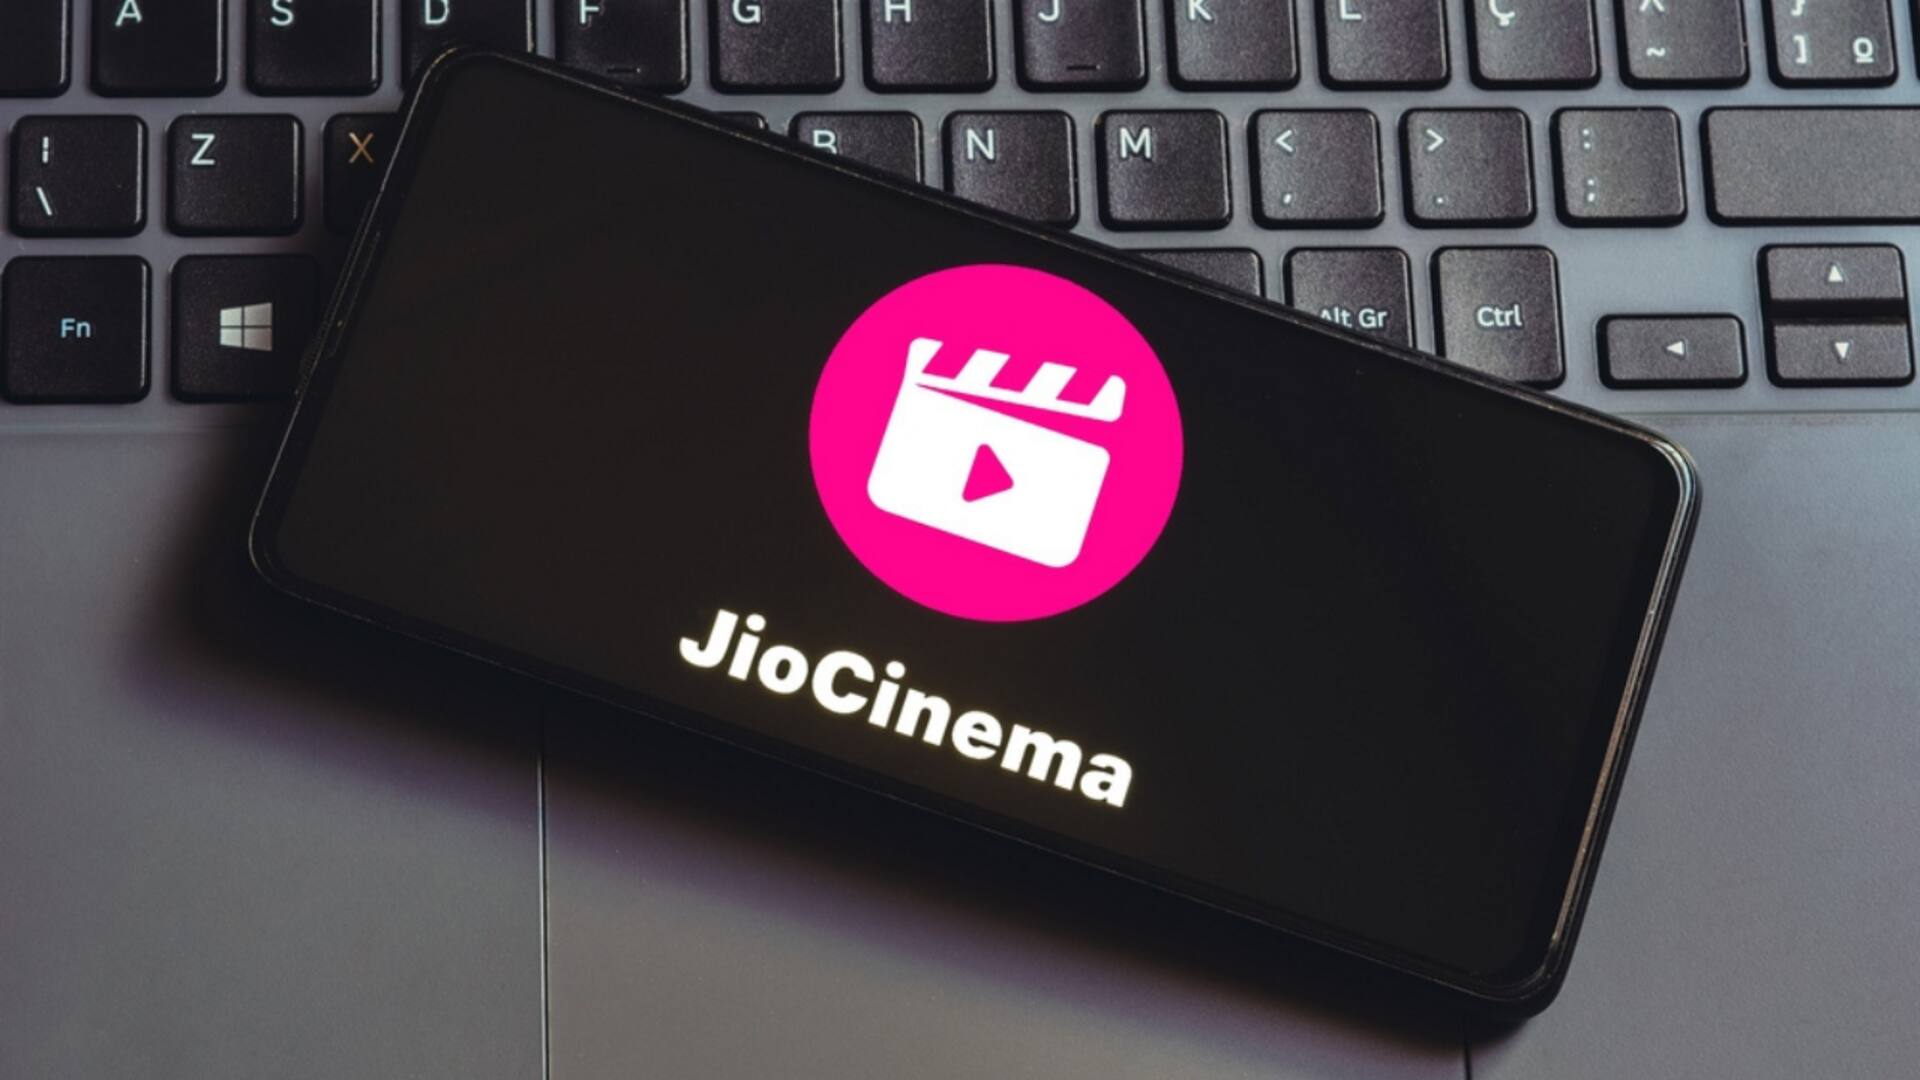 JioCinema Premium to expand offerings with anime content starting tomorrow